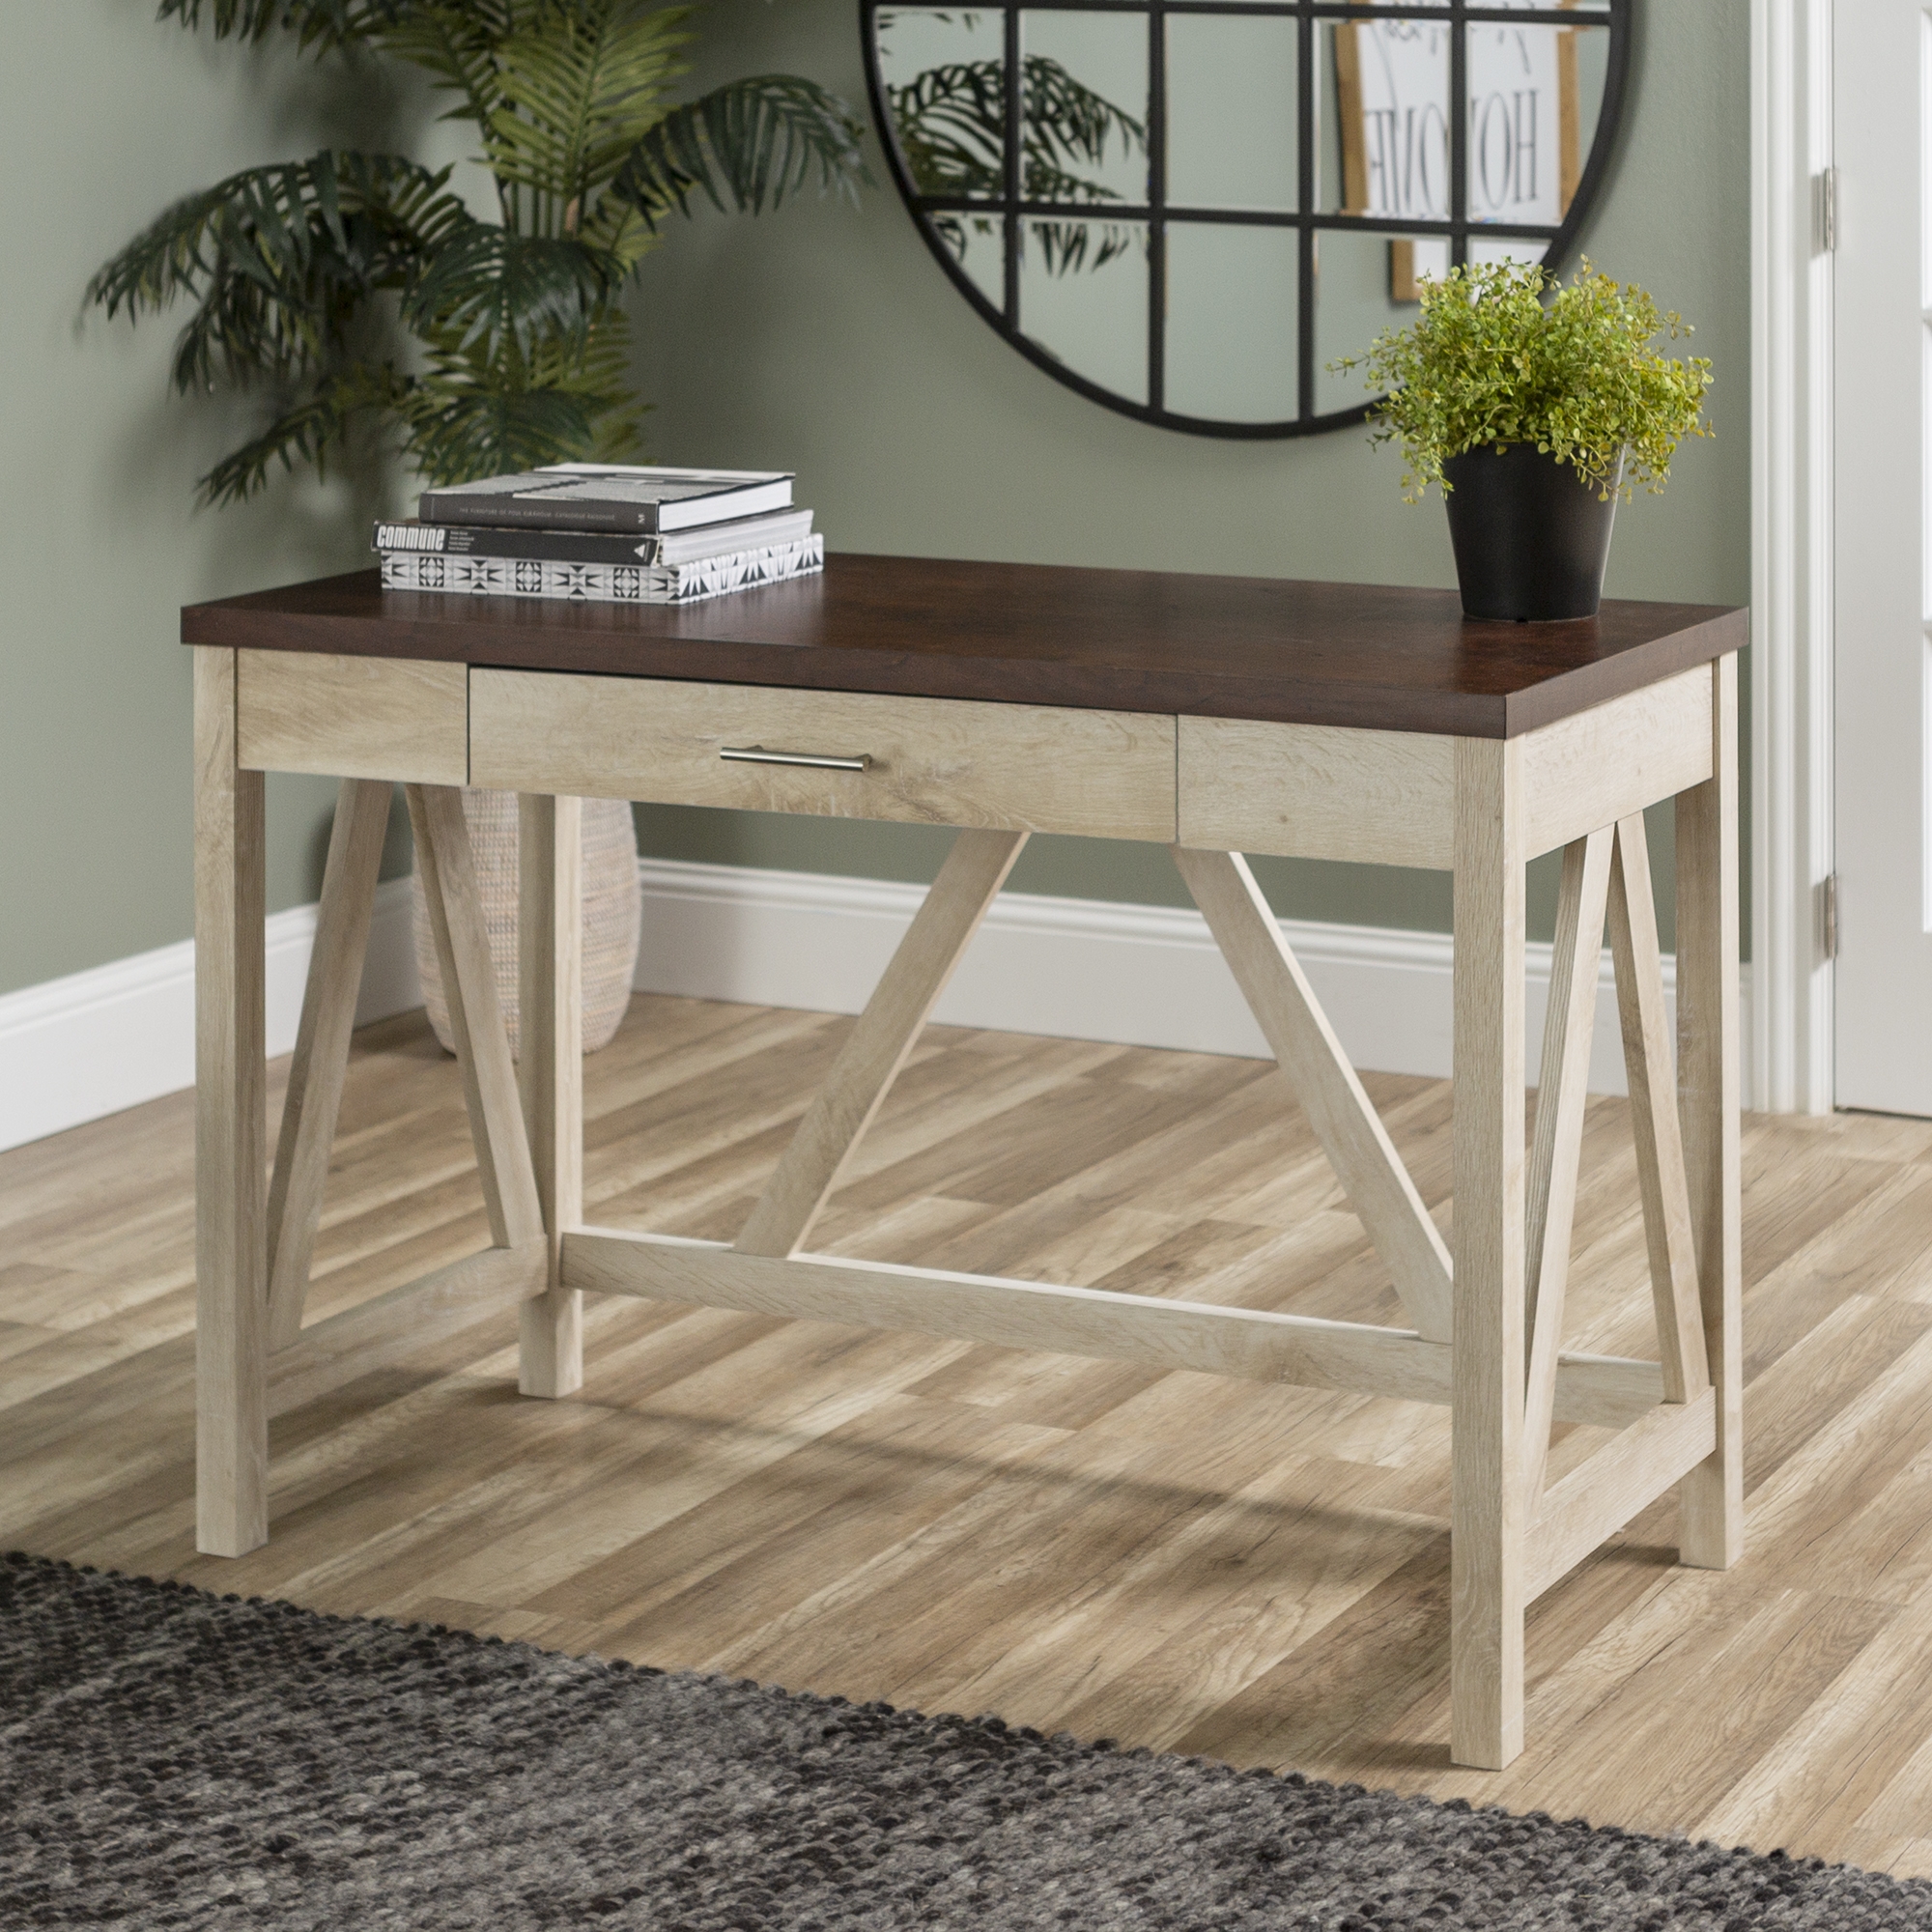 46" A Frame Modern Farmhouse Wood Computer Desk with Drawer - White Oak/Traditional Brown - Image 3